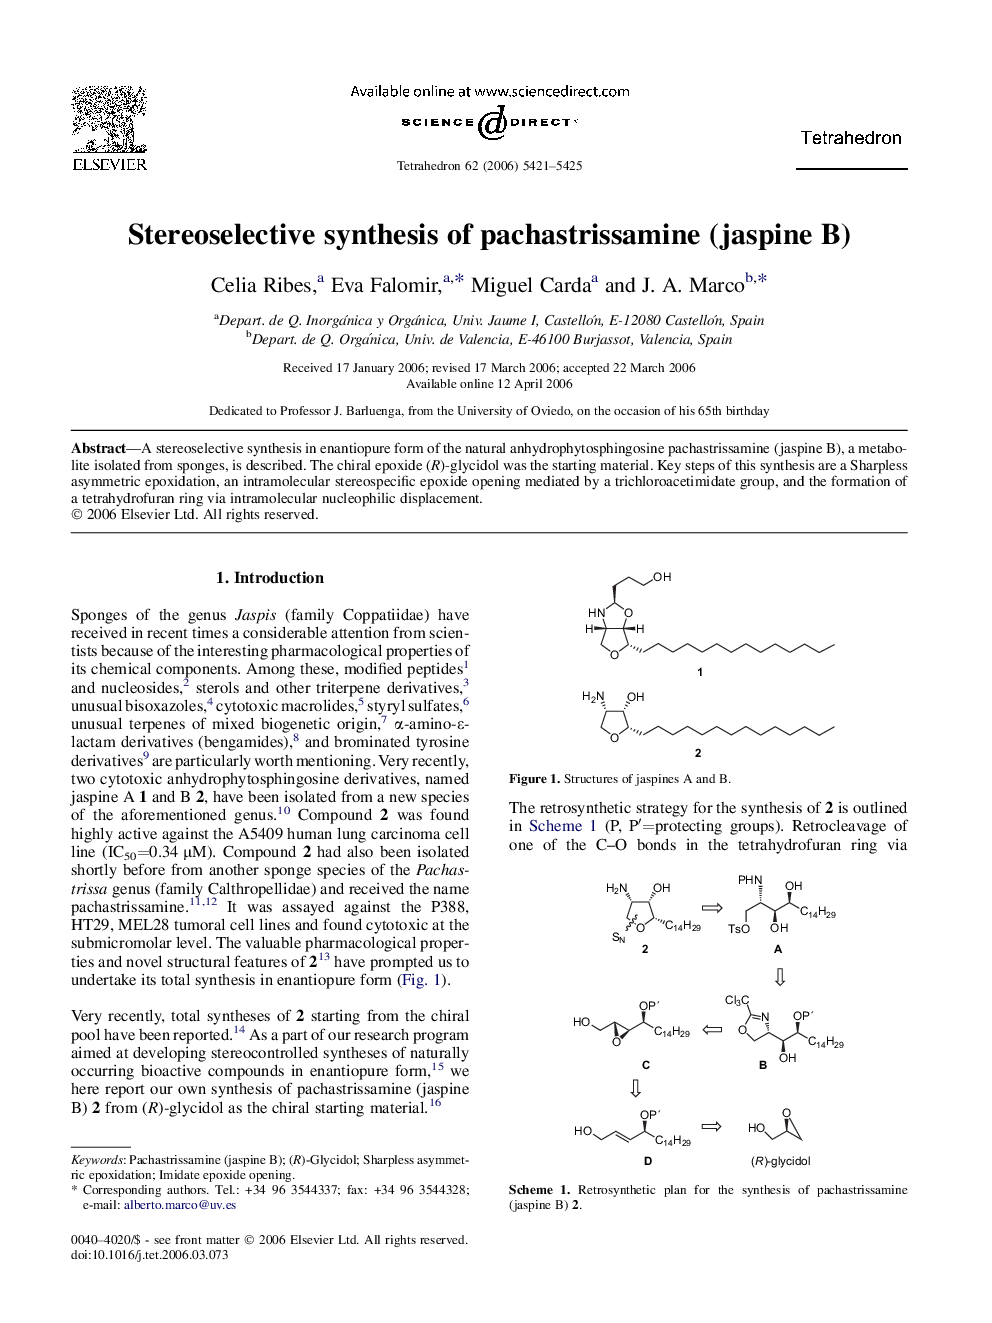 Stereoselective synthesis of pachastrissamine (jaspine B)